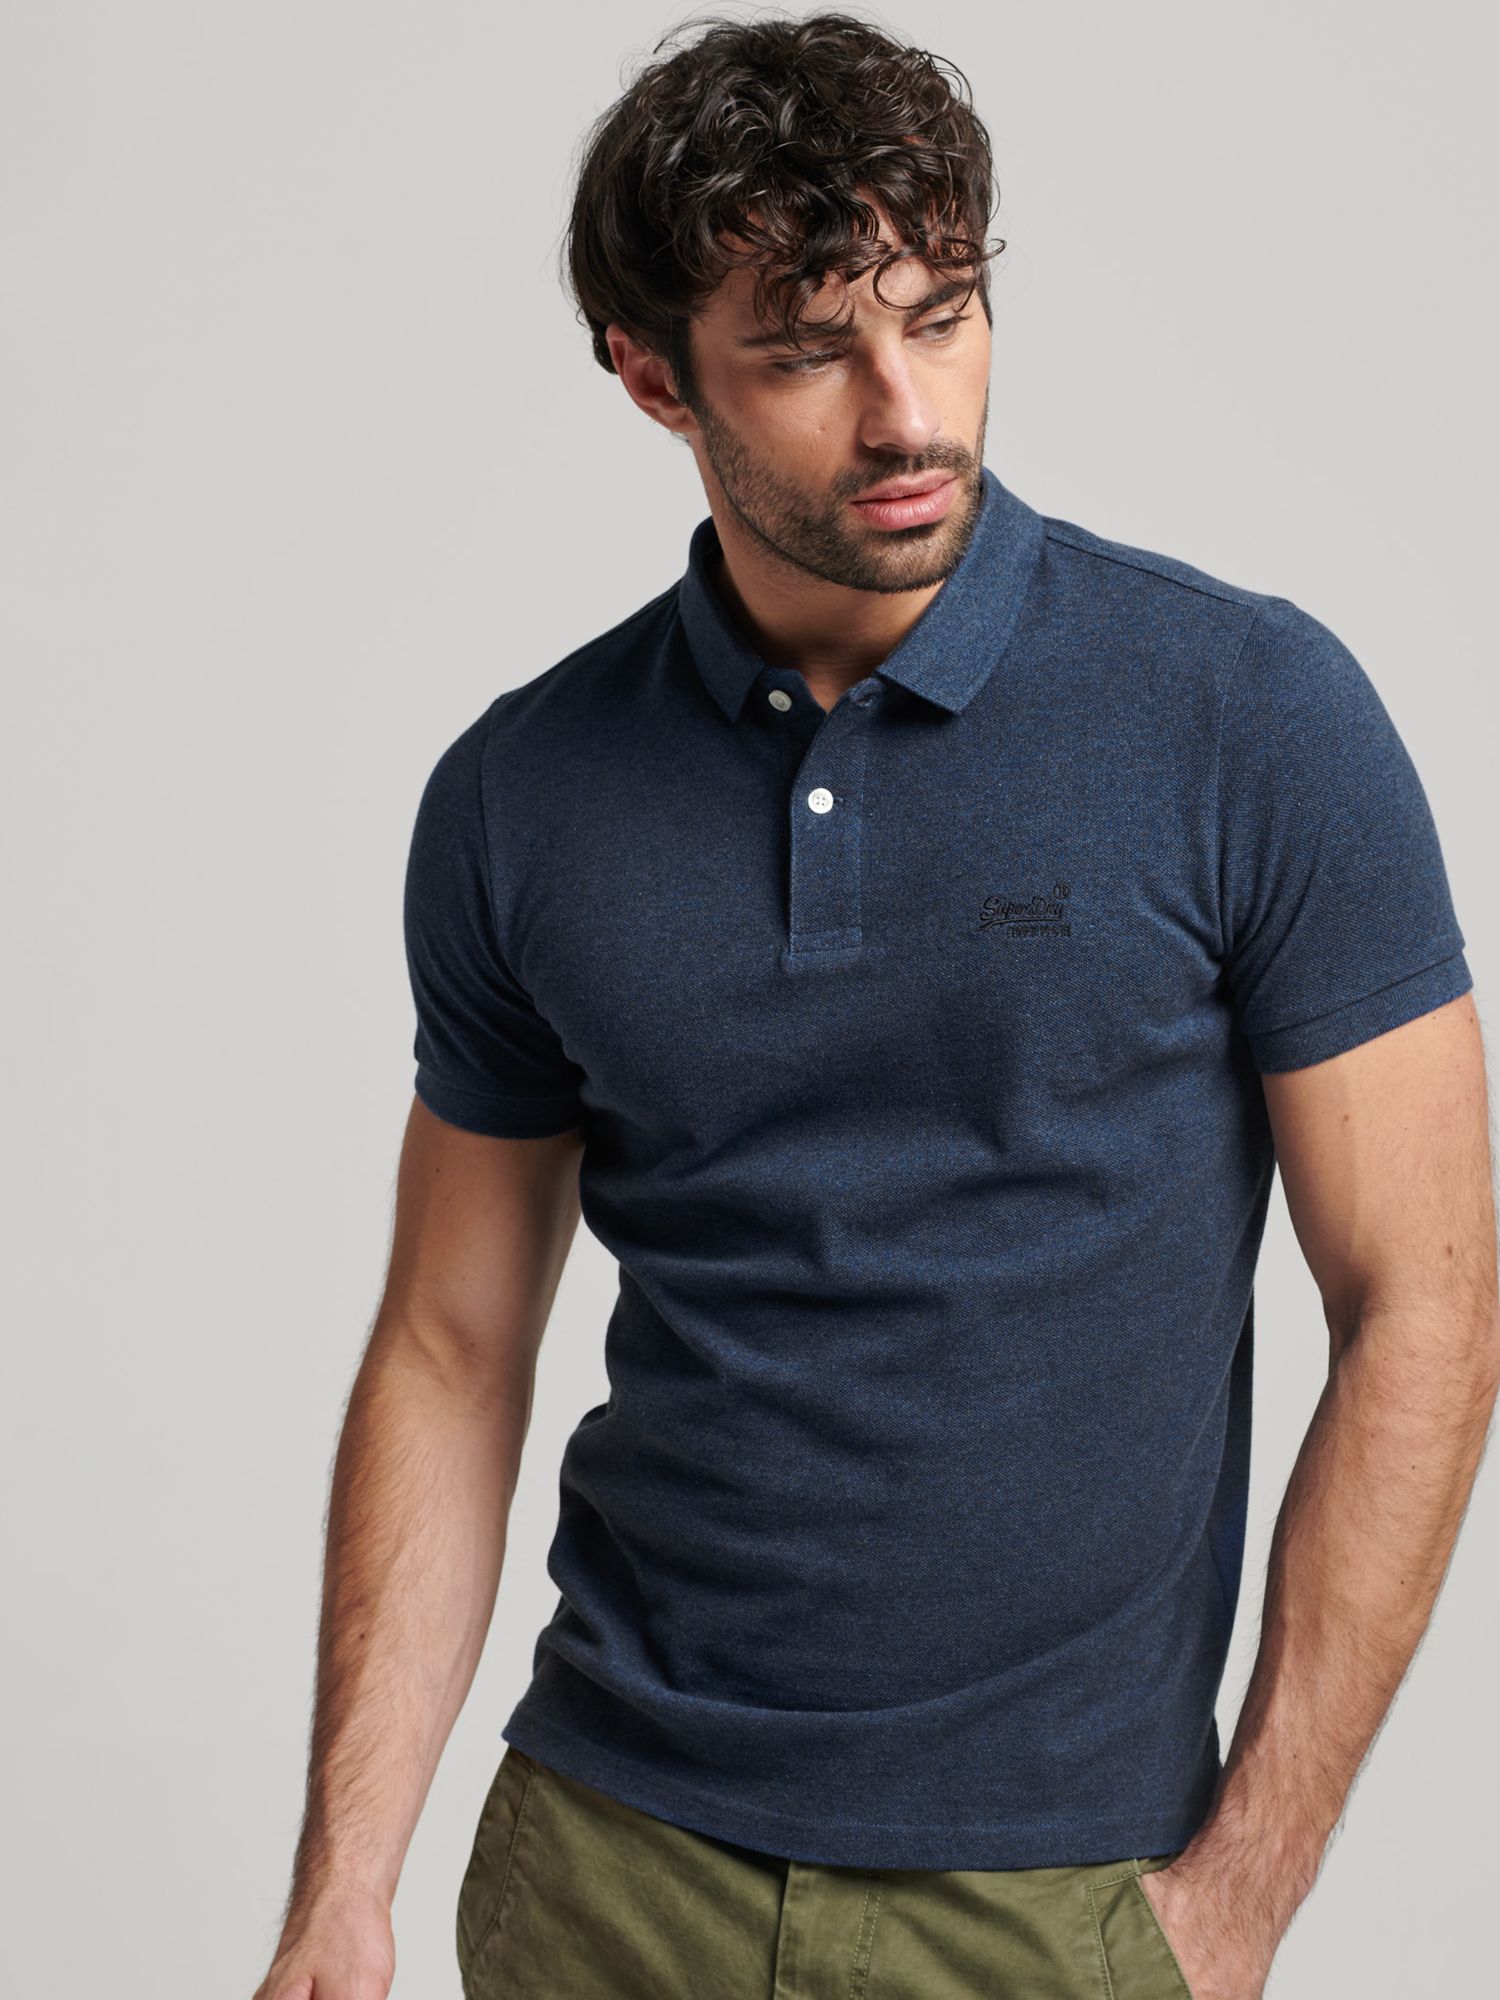 Superdry Classic John Bright & at Pique Lewis Marl Partners Blue Polo Shirt